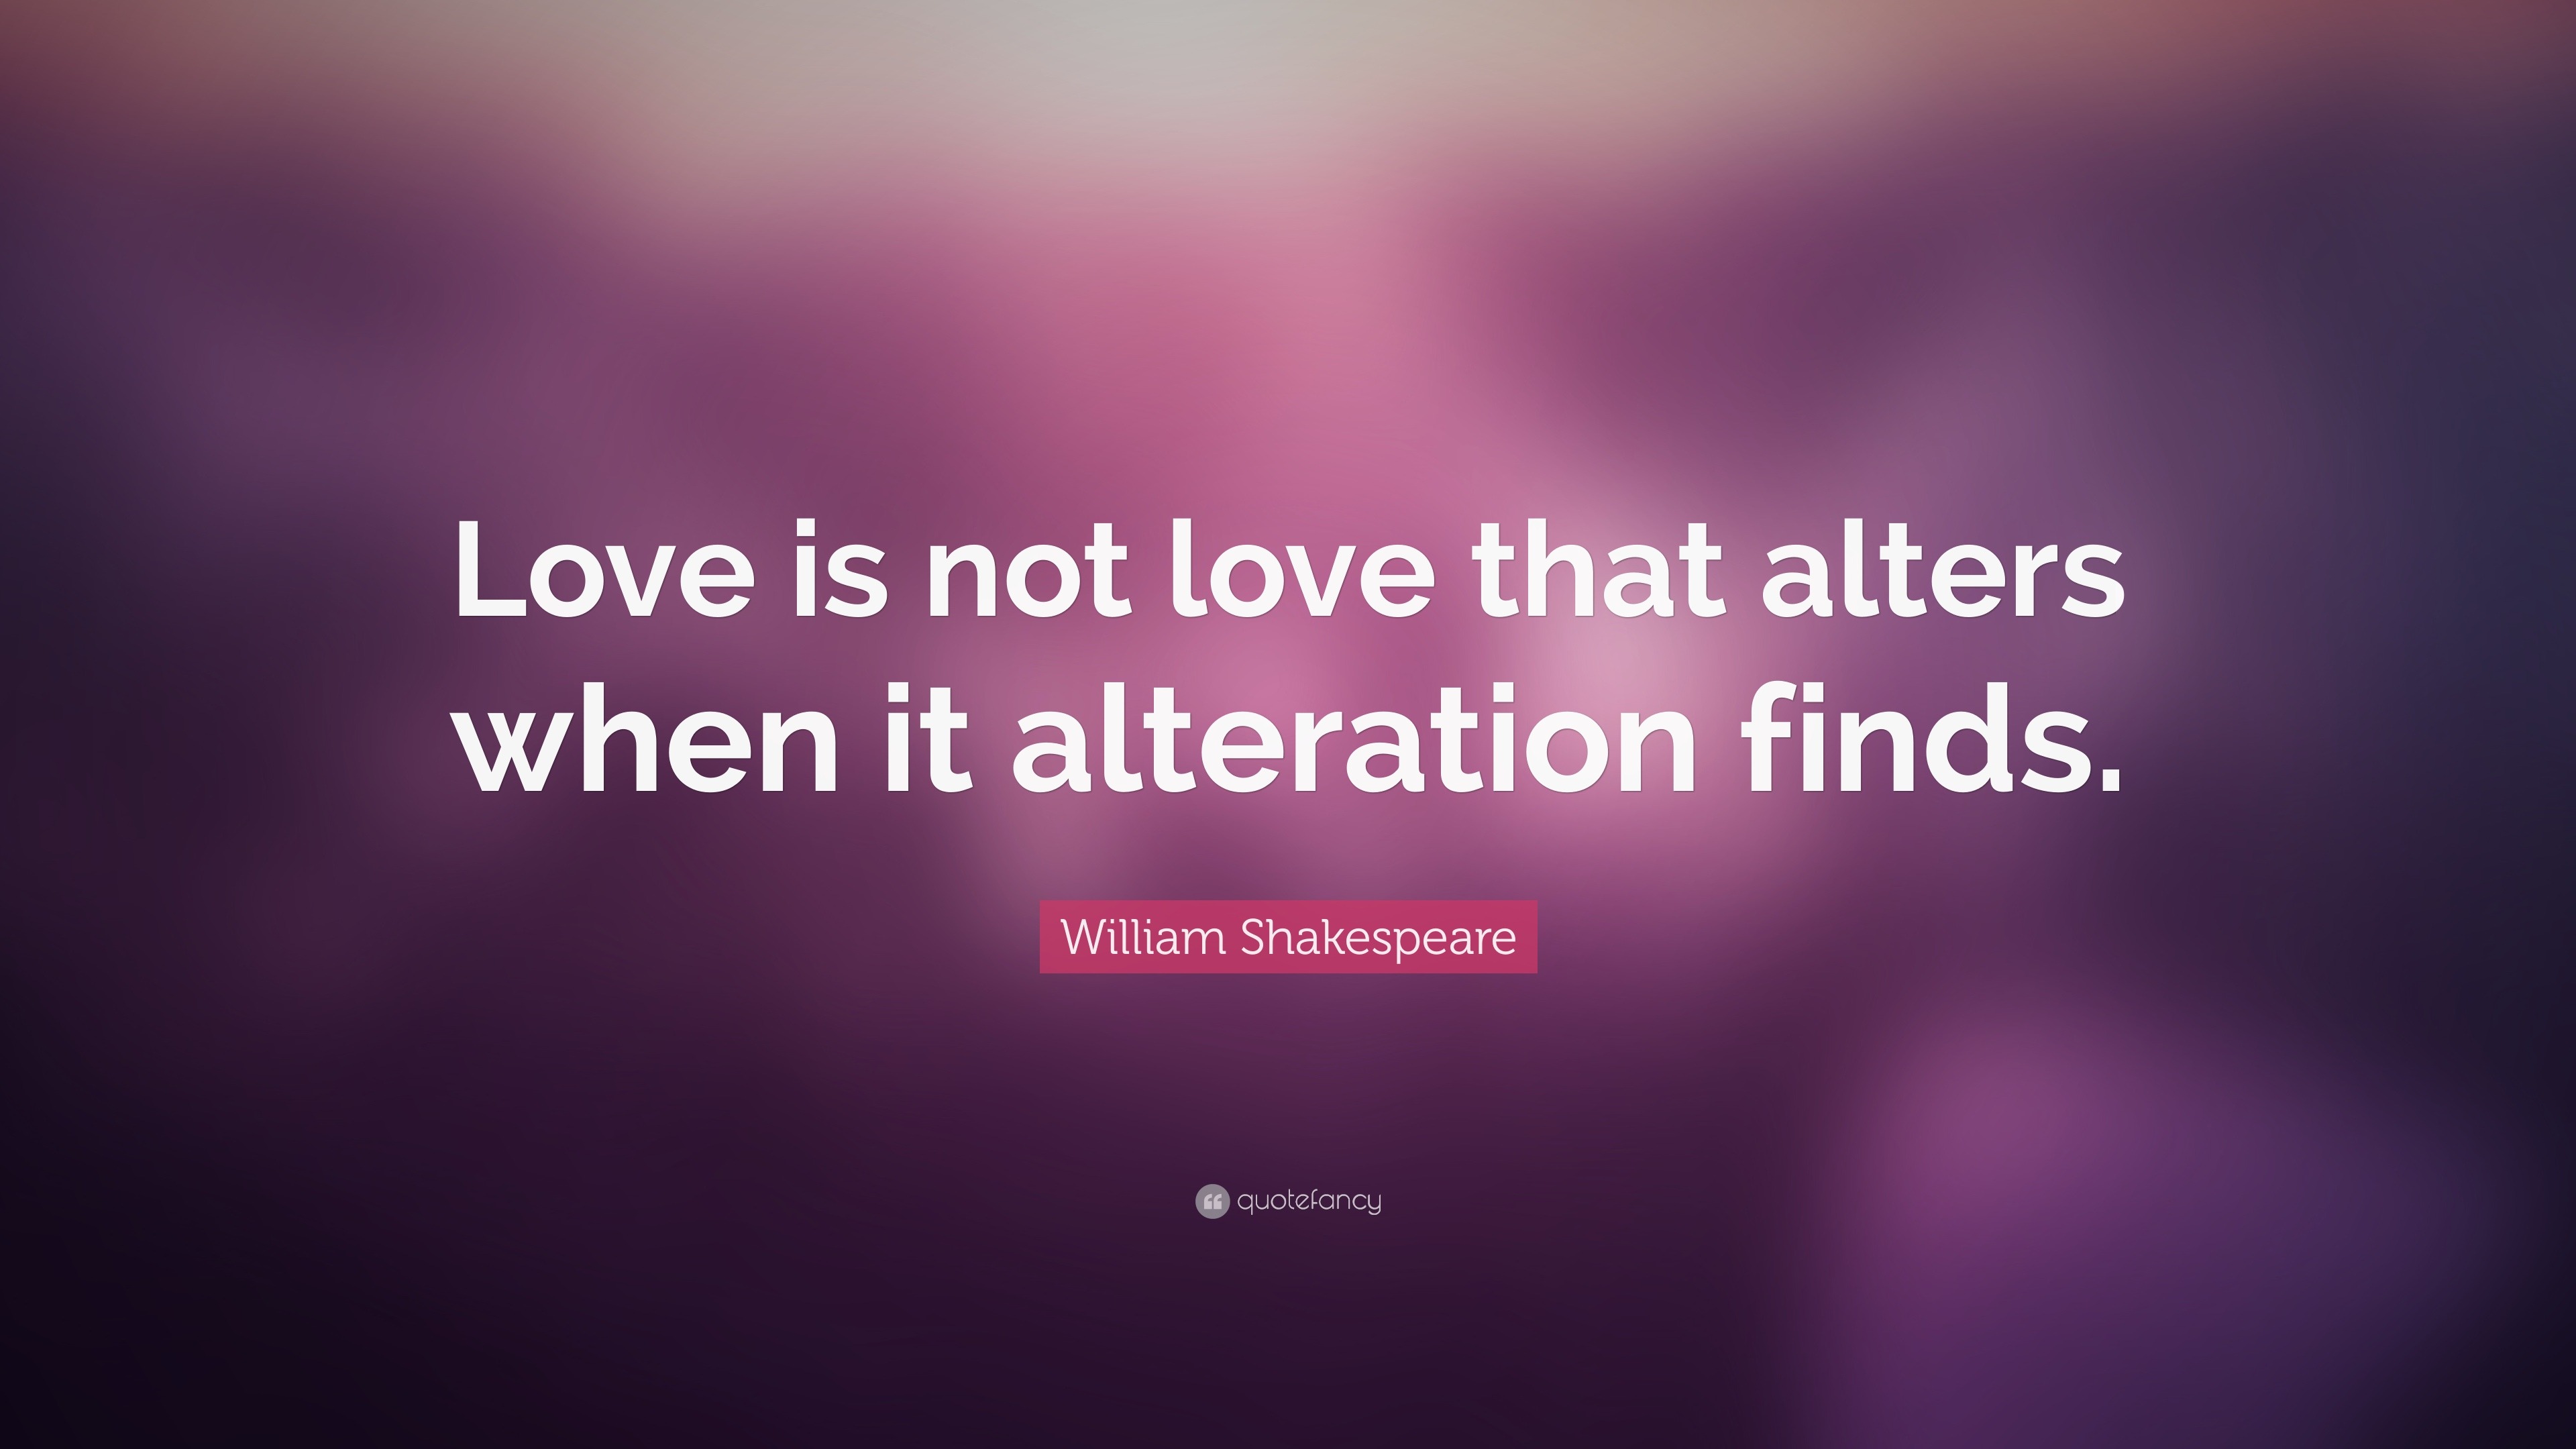 William Shakespeare Quote “Love is not love that alters when it alteration finds